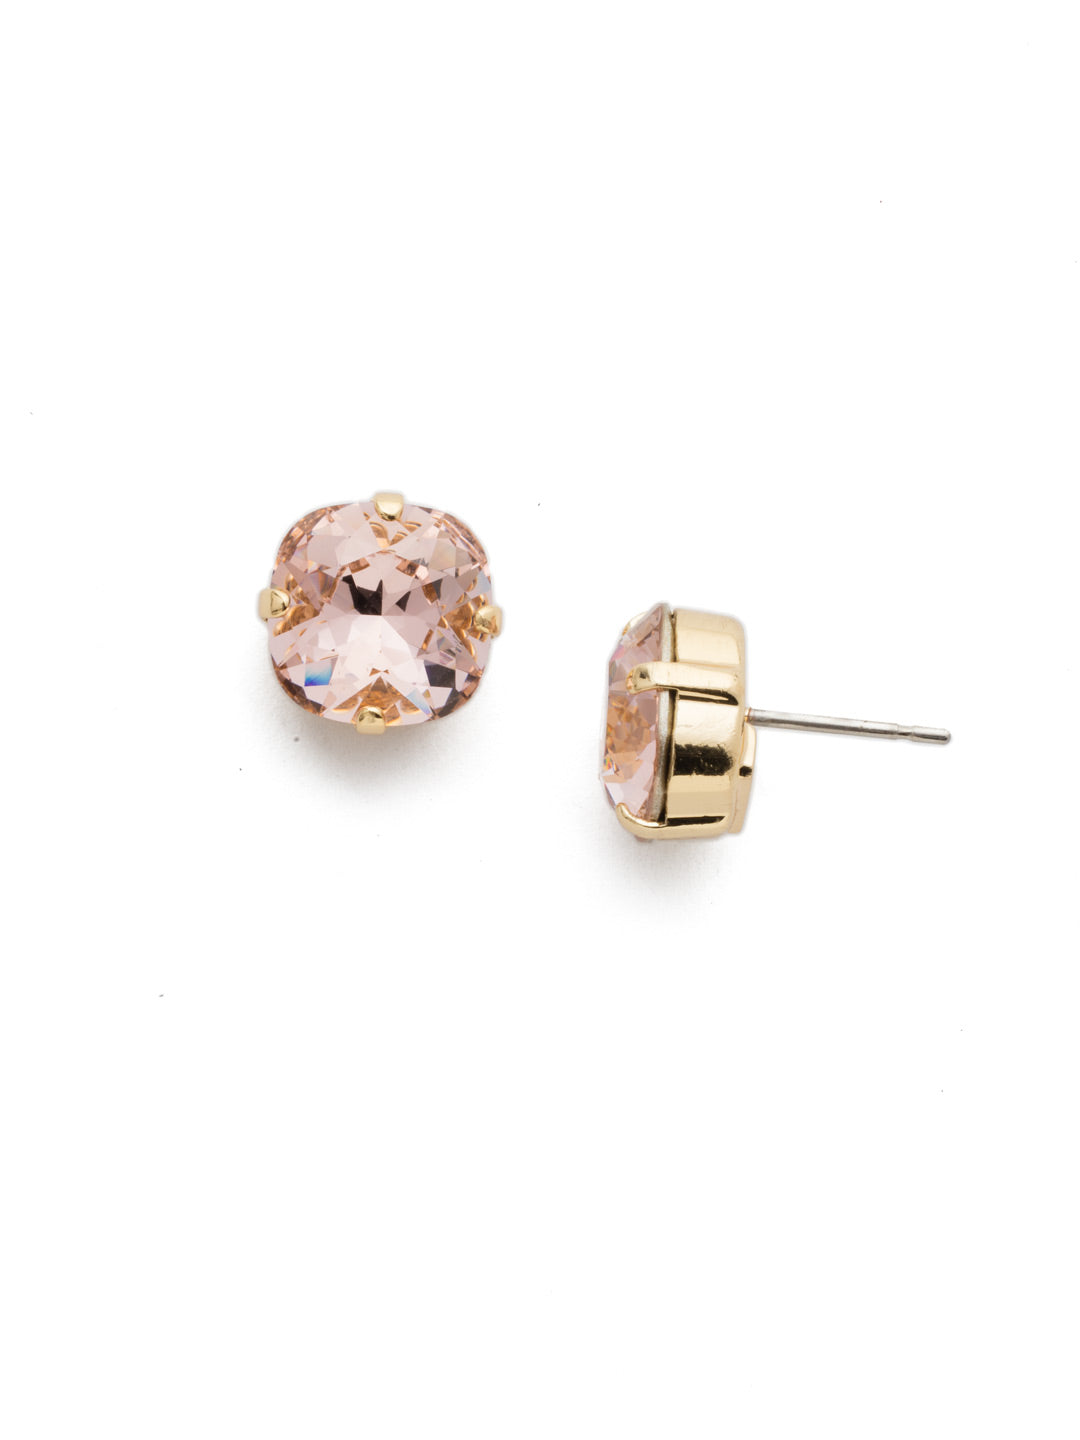 Halcyon Stud Earrings - EDH25BGVIN - A beautiful, luminous cushion-cut crystal in a classic four-pronged setting that's ideal for everyday wear. From Sorrelli's Vintage Rose collection in our Bright Gold-tone finish.